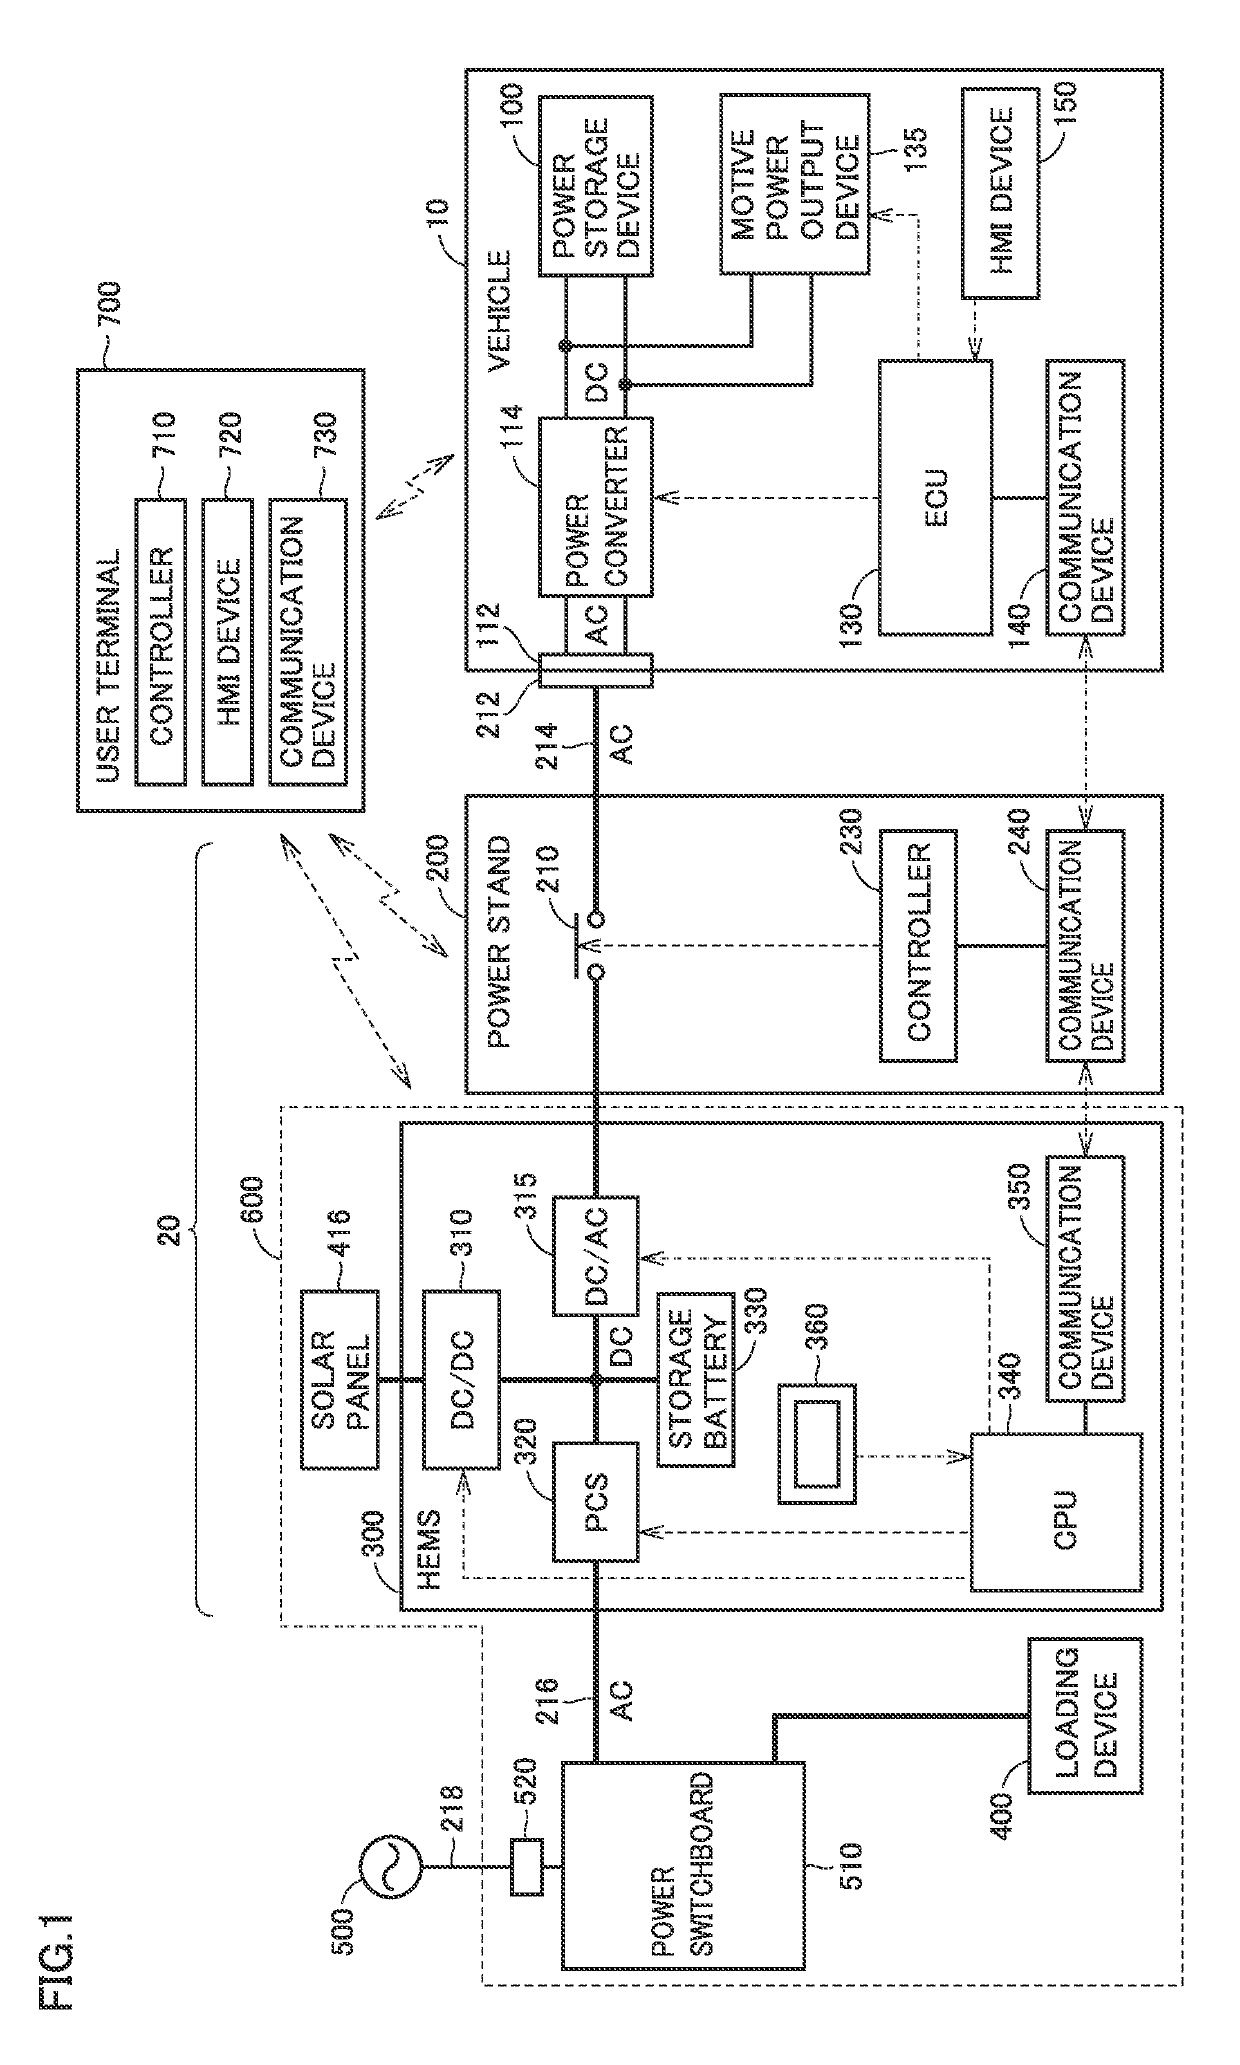 Vehicle and power control system